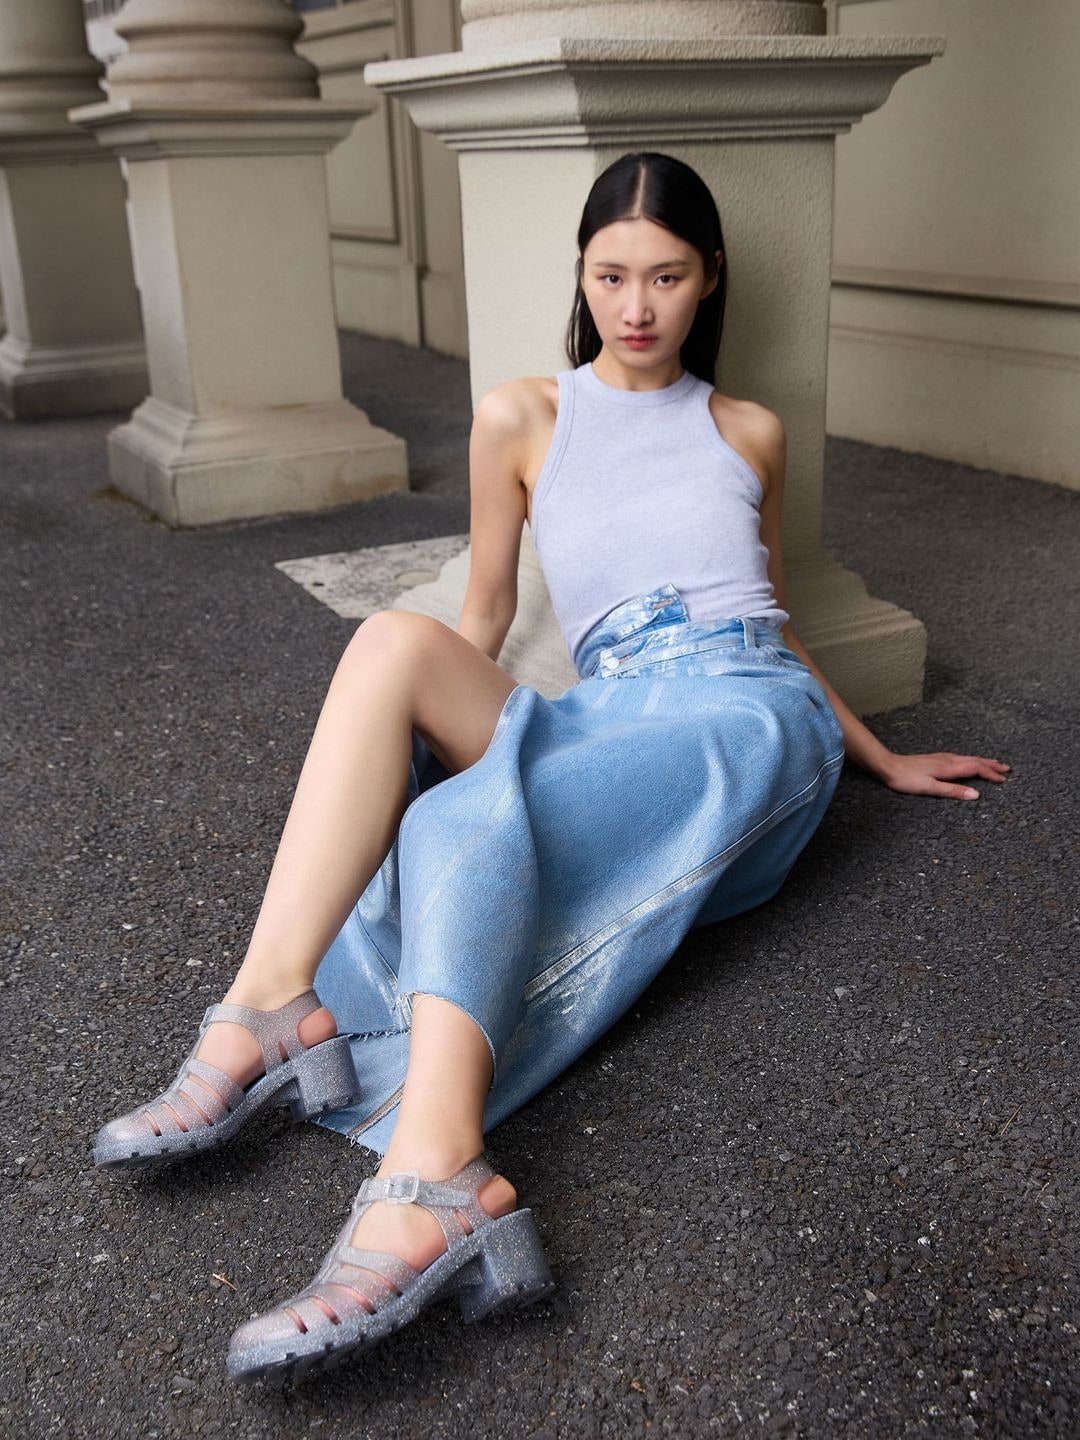 A model poses in a jean skirt and tank top for footwear brand Melissa.